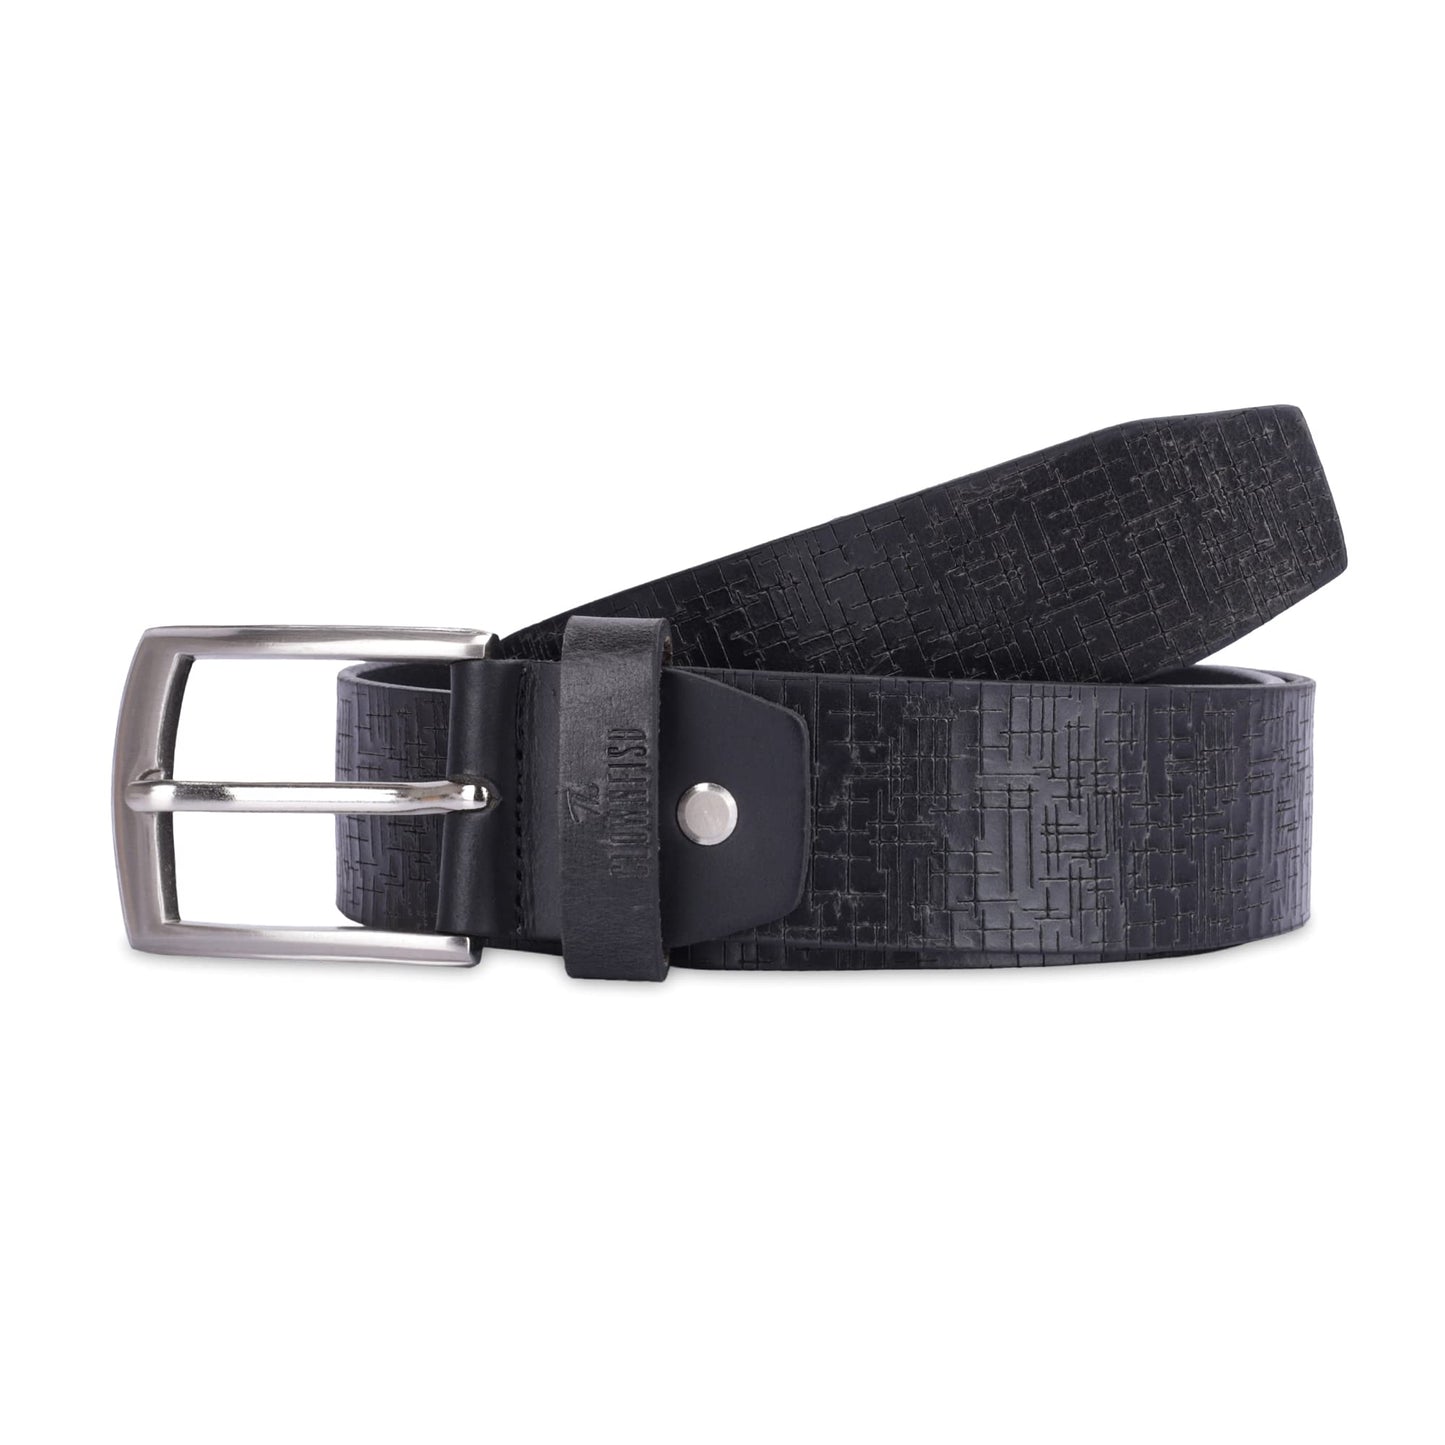 THE CLOWNFISH Men's Genuine Leather Belt with Textured Design- Black (Size-40 inches)